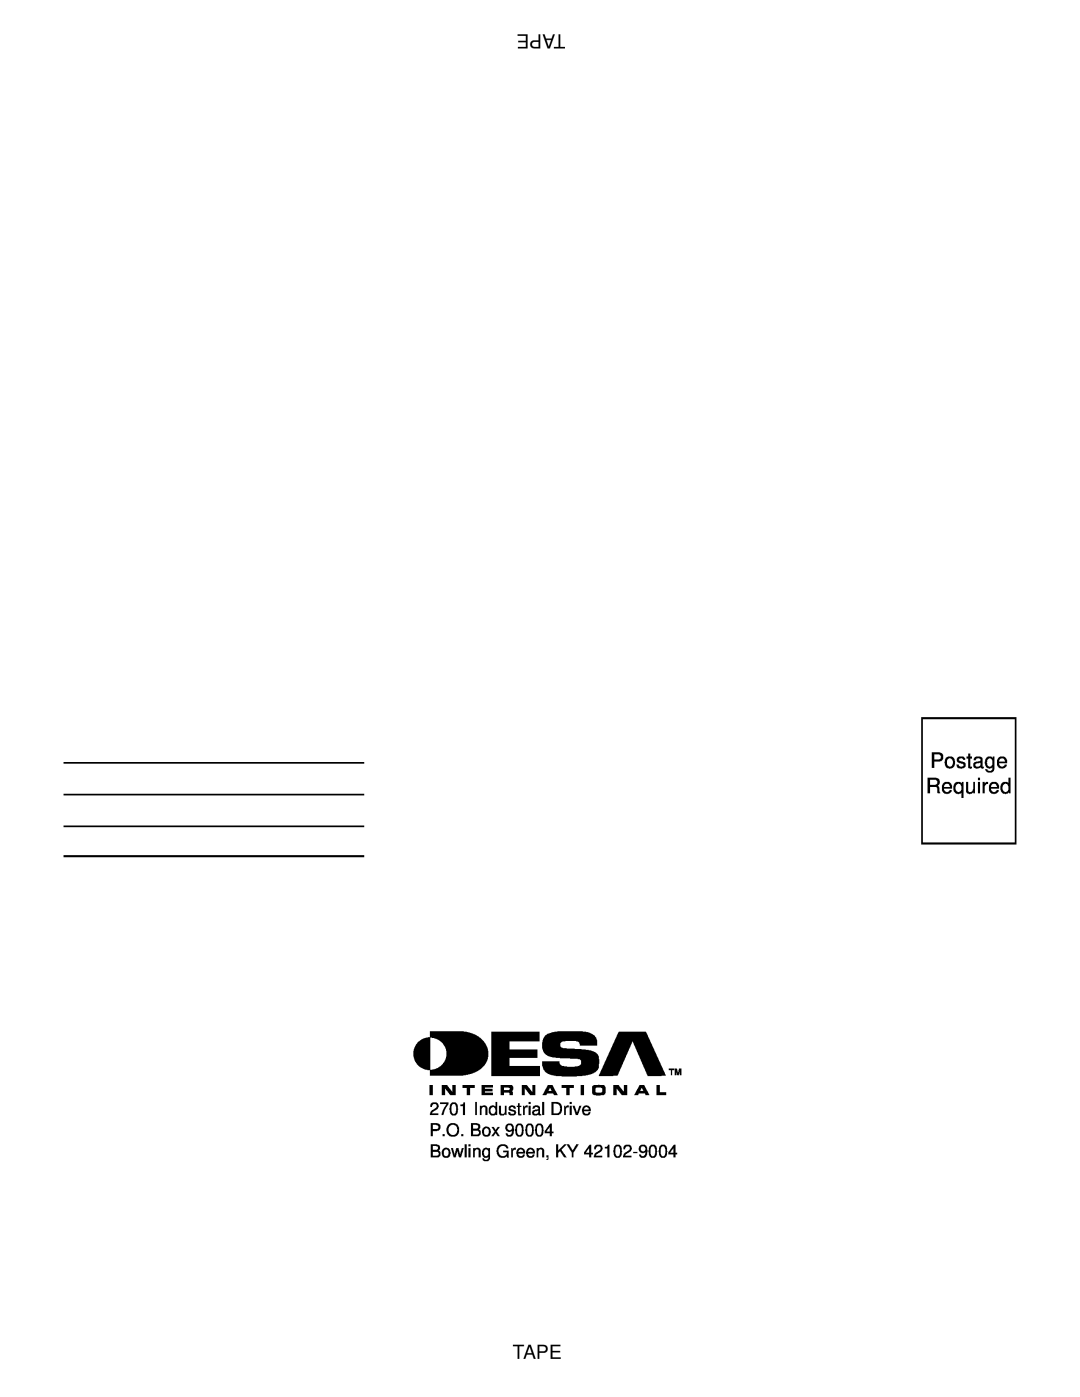 Desa CGS3124P installation manual Postage Required, Tape 